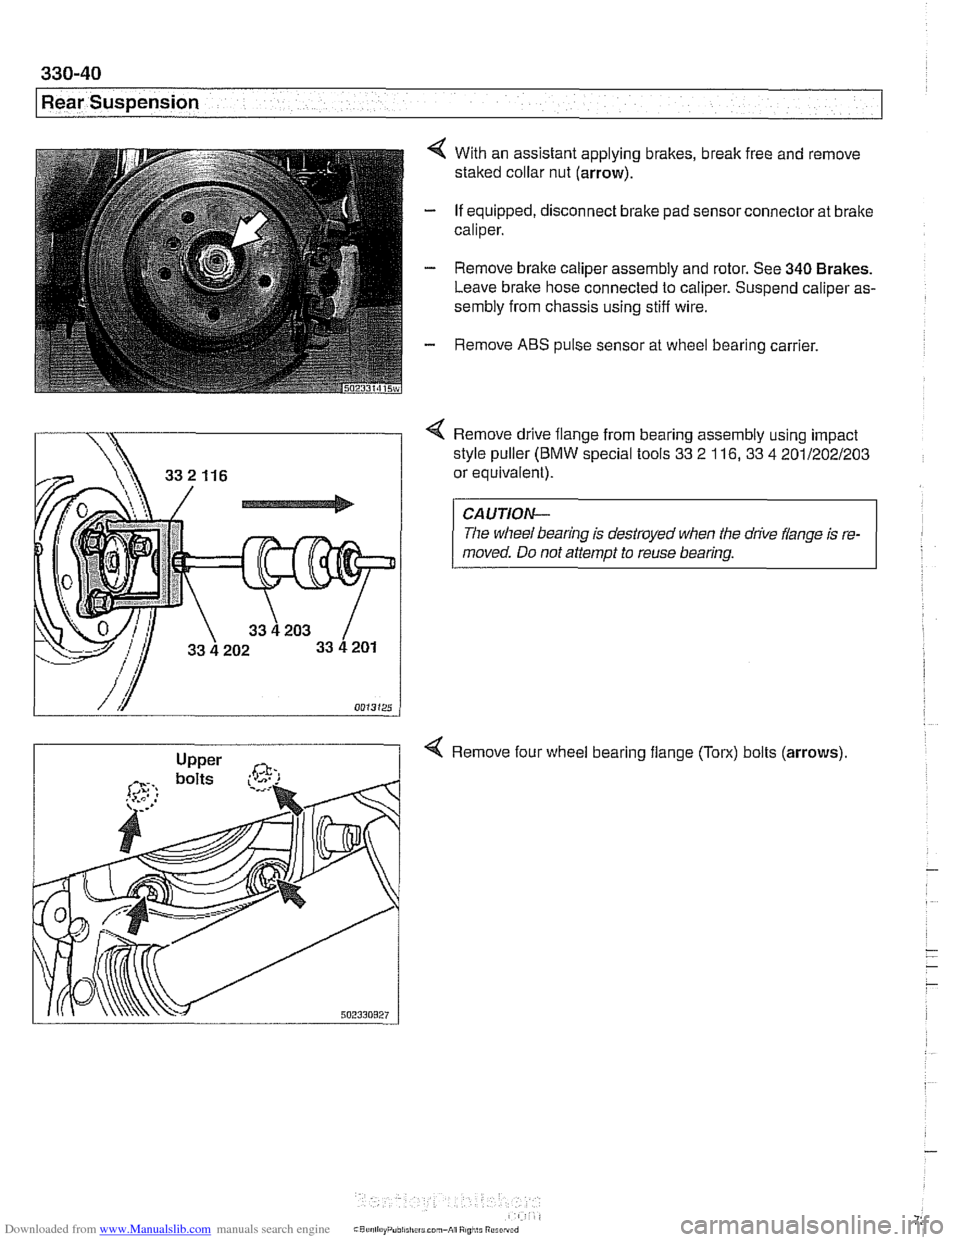 BMW 525i 2000 E39 Workshop Manual Downloaded from www.Manualslib.com manuals search engine 
330-40 
Rear Suspension 
4 With an assistant applying brakes, break free and  remove 
staked  collar nut  (arrow). 
- If equipped,  disconnect